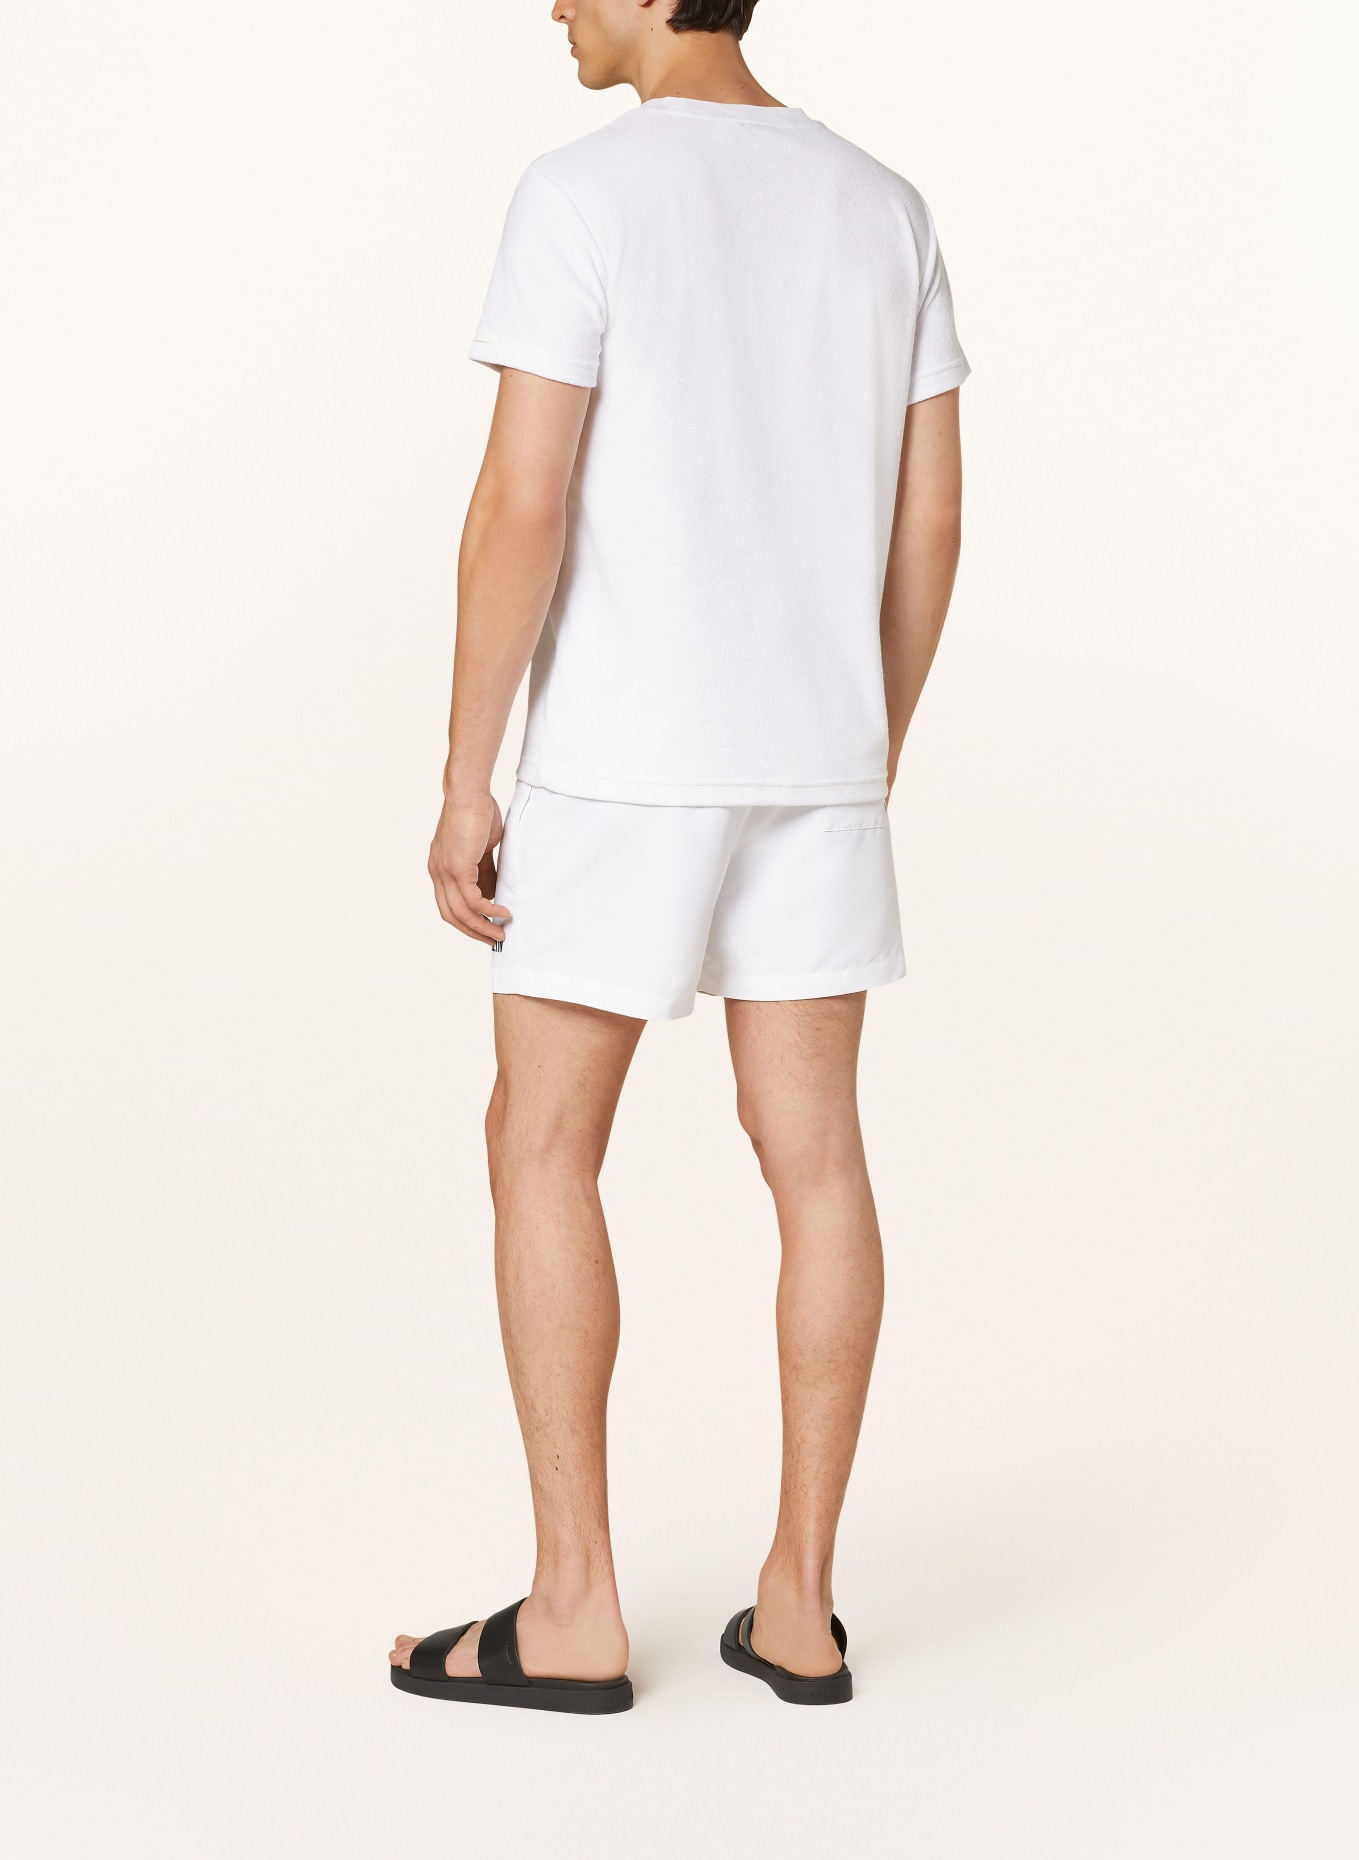 Calvin Klein T-shirt made of terry cloth, Color: WHITE (Image 3)